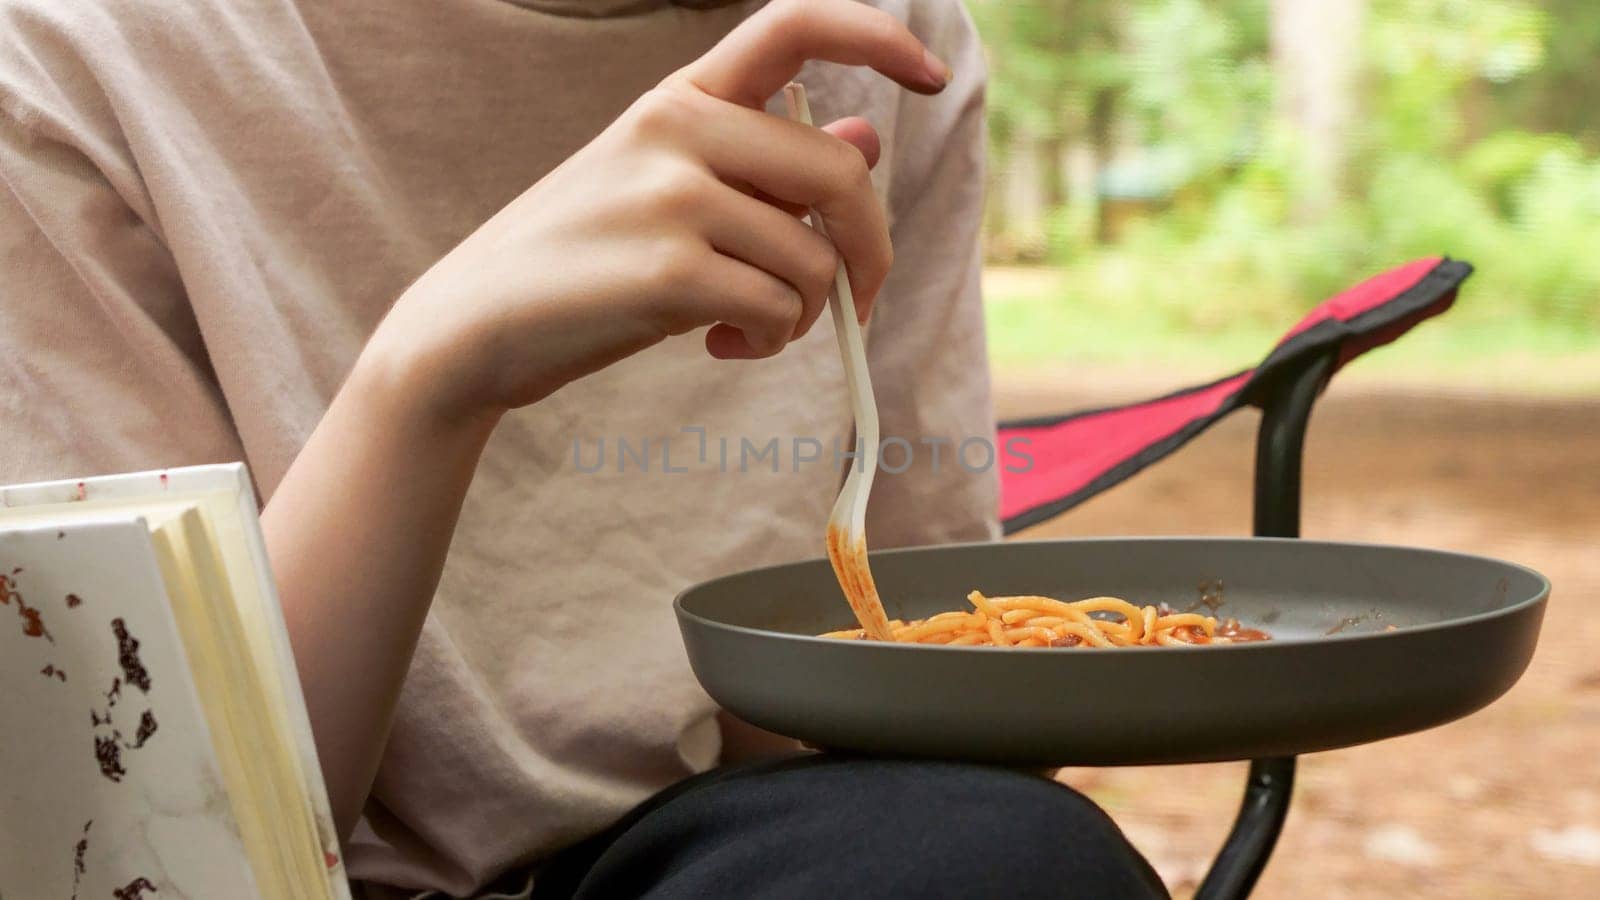 Unrecognizable young woman having summer picnic eating spaghetti outside in forest camping. Summer outdoors activities. Backyard picnic. by JuliaDorian